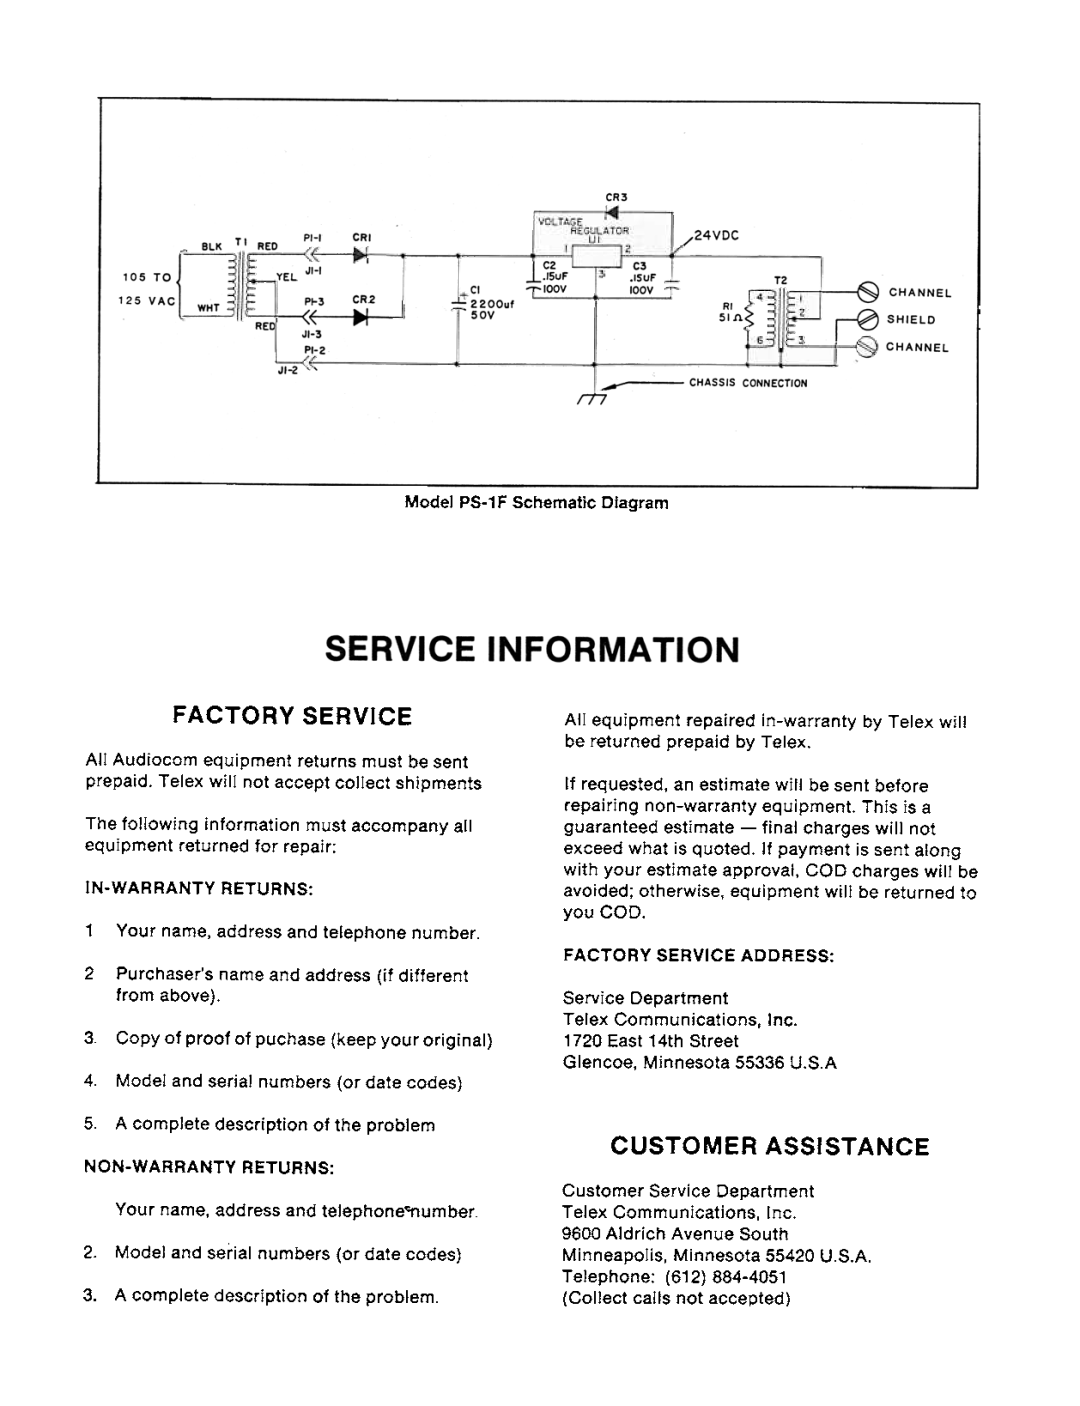 Telex PS-1 specifications Service Information, Factory Service, Customer Assistance 